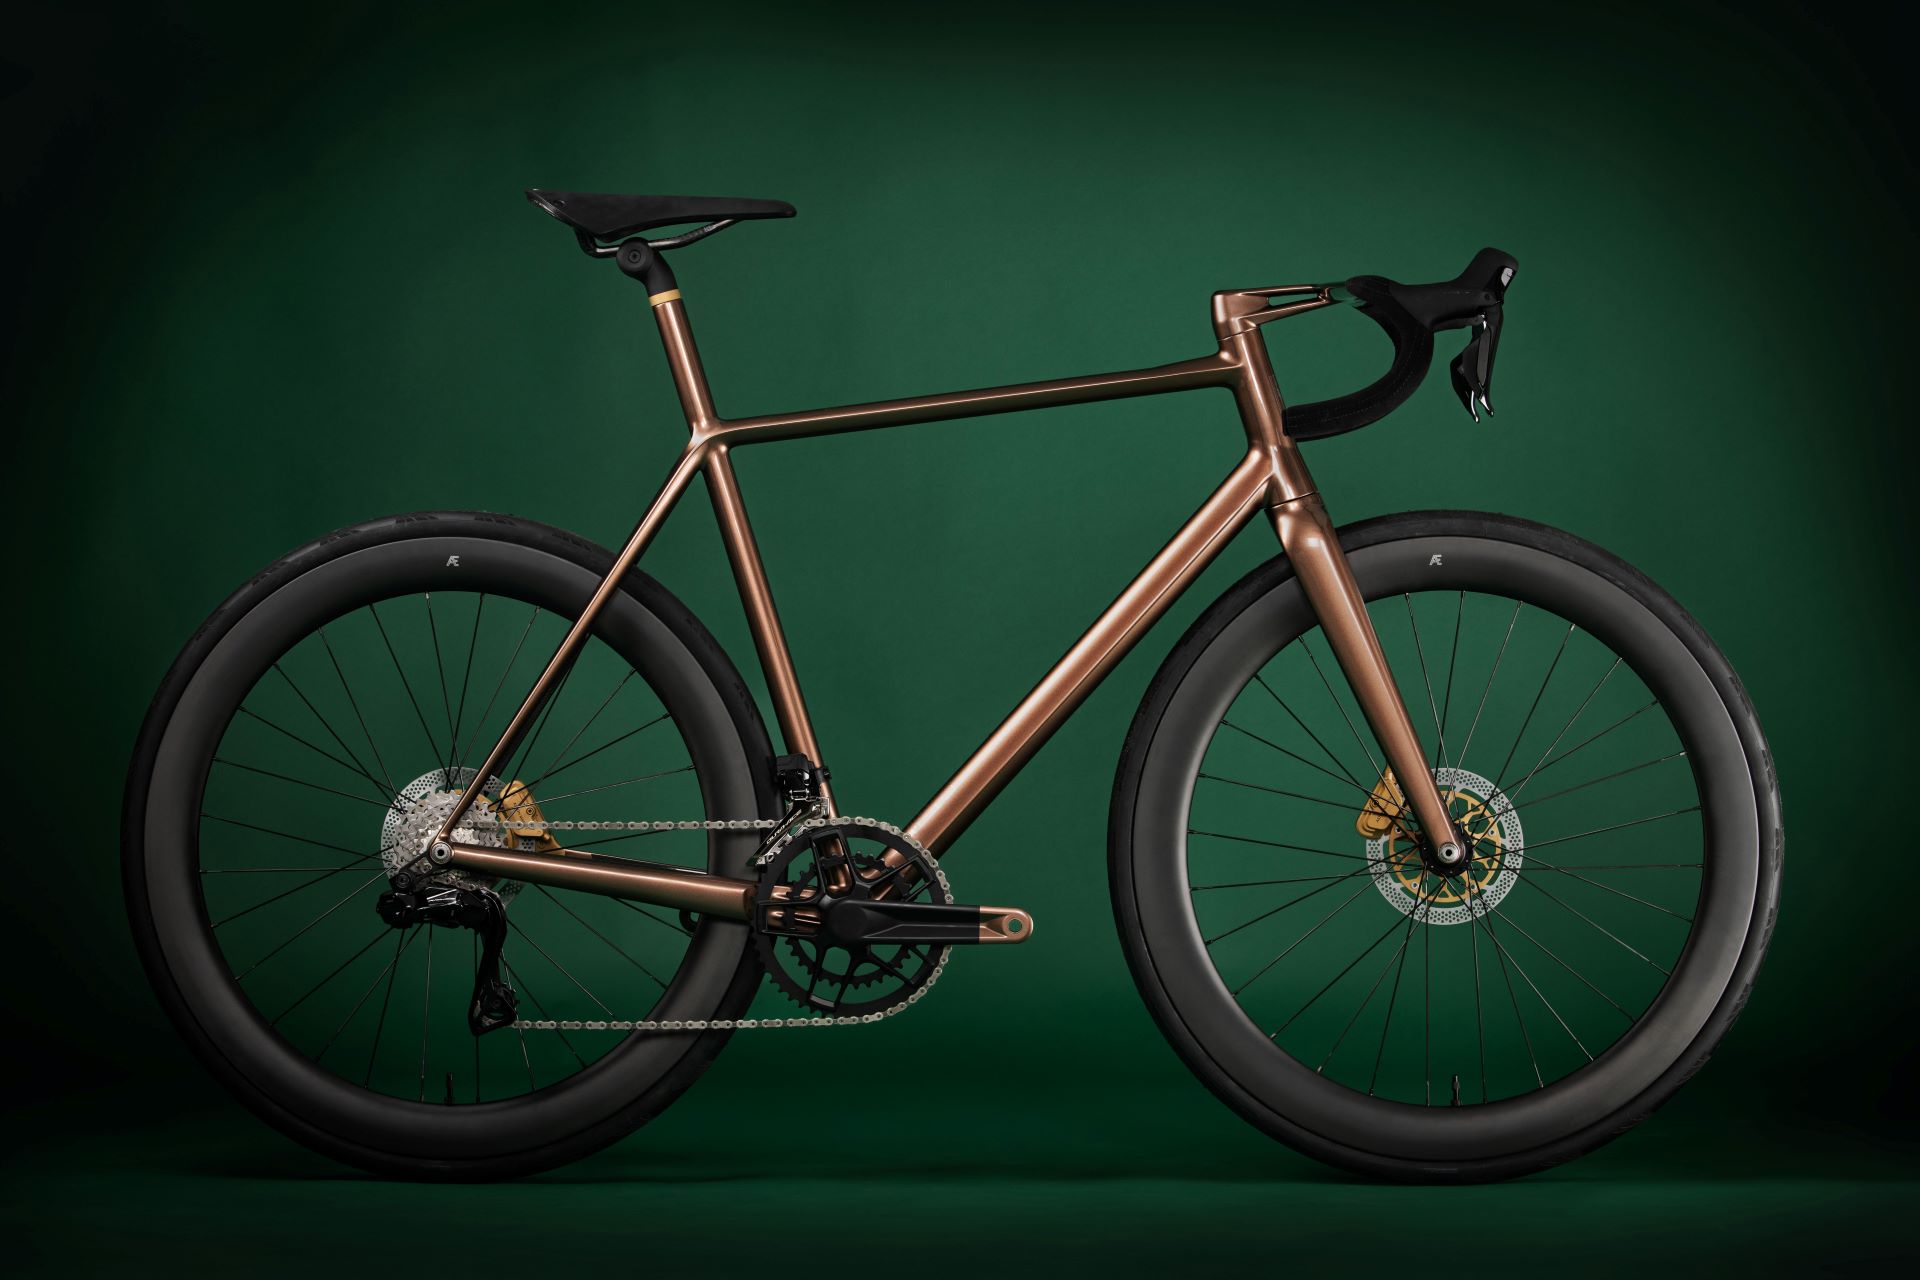 Aston Martin reveals the world’s most bespoke, advanced and meticulously engineered road bicycle